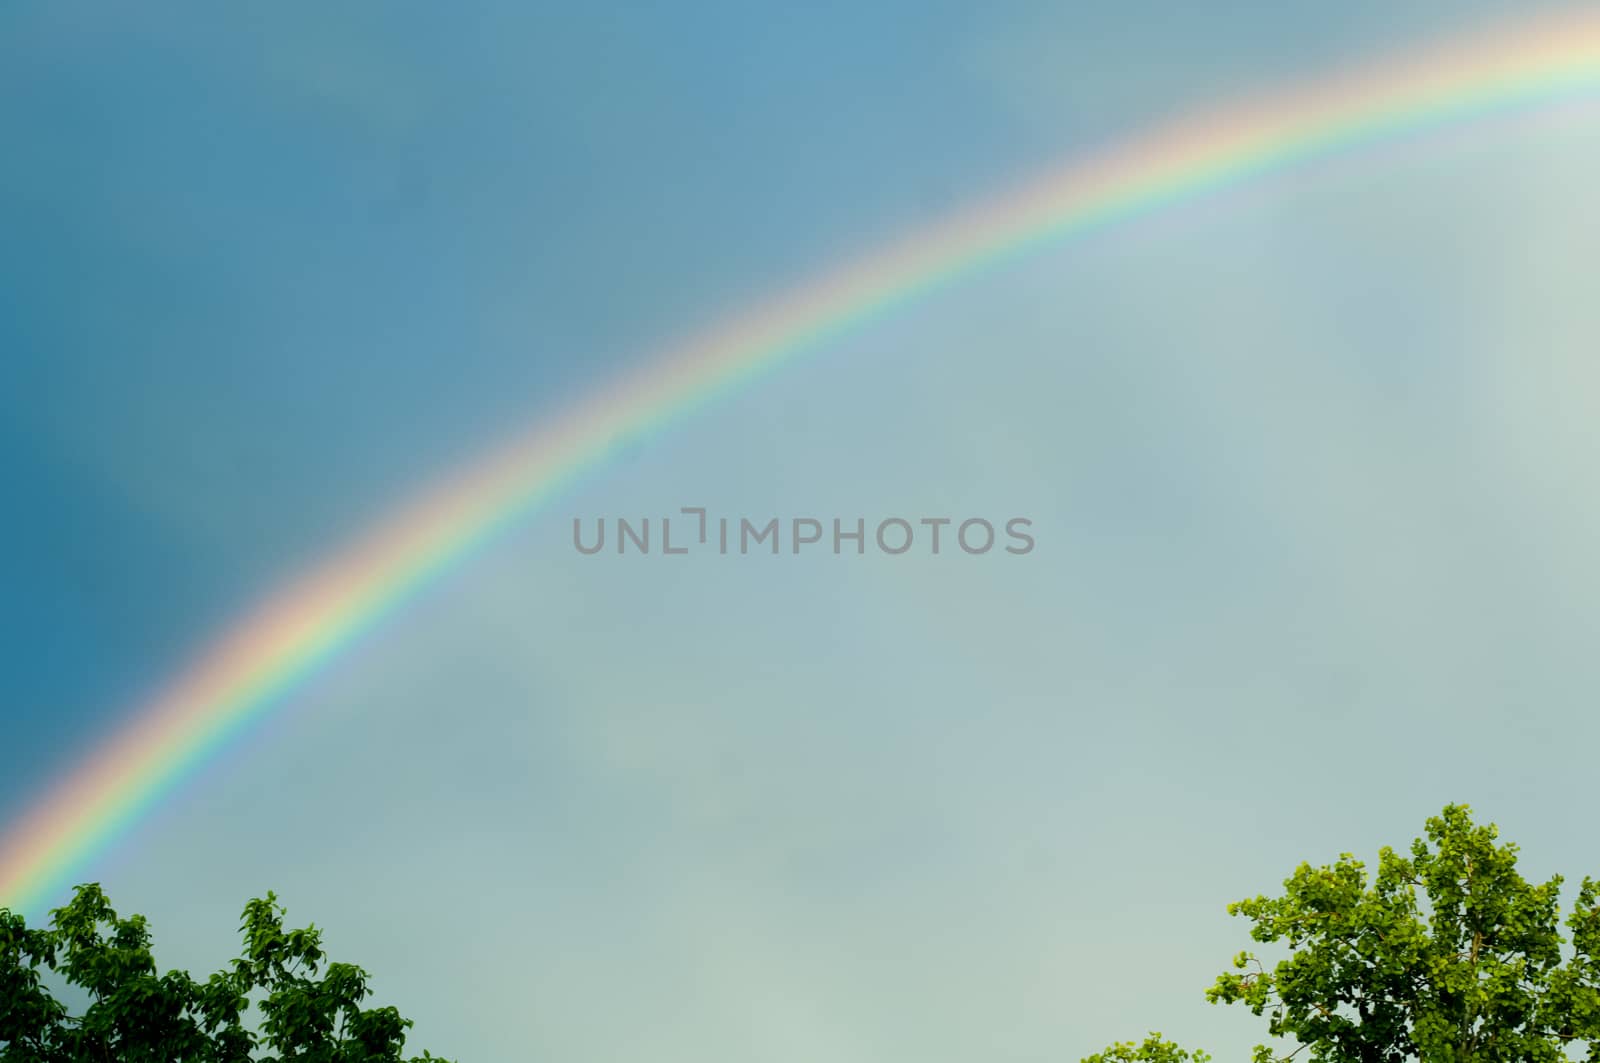 Rainbow in the soft blue sky above two small trees